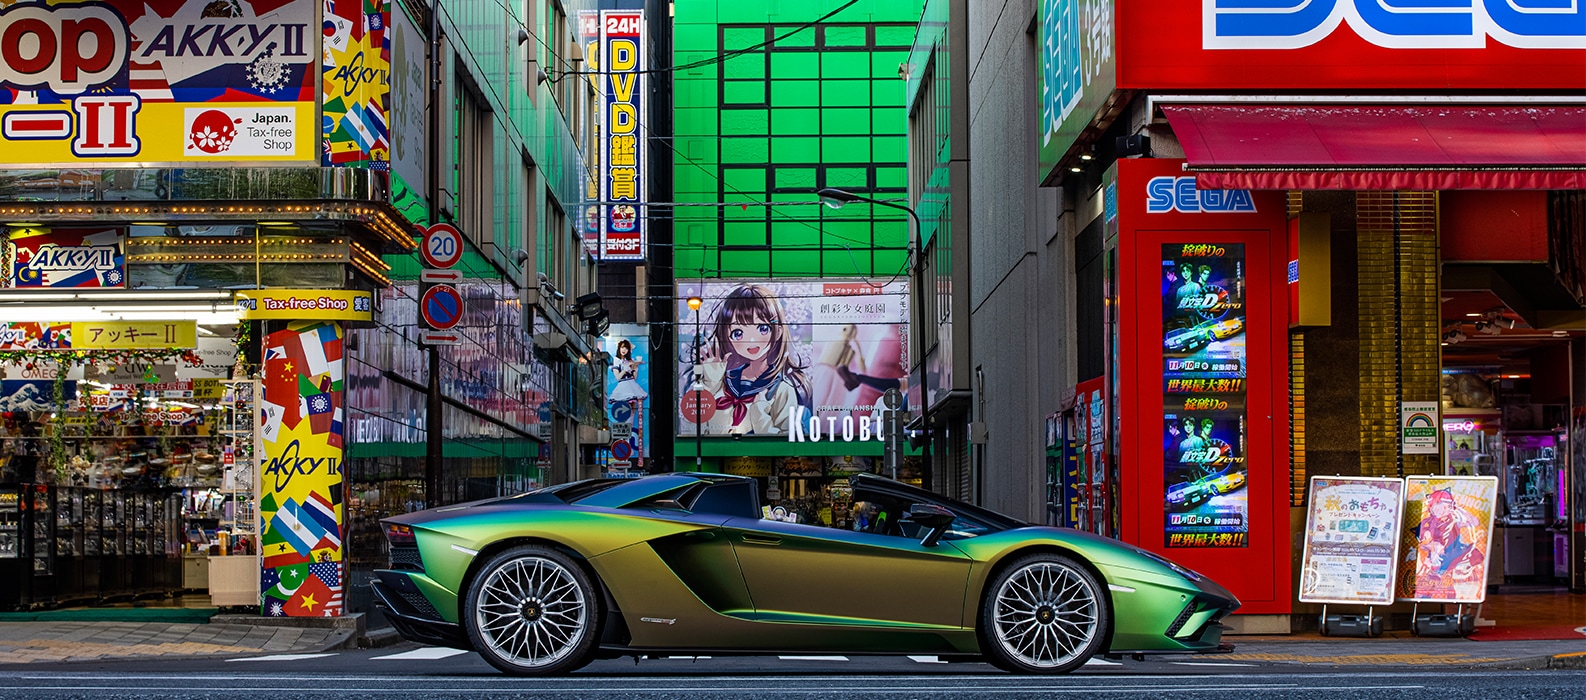 Lamborghini's “With Italy, For Italy” project reaches Asia-Pacific